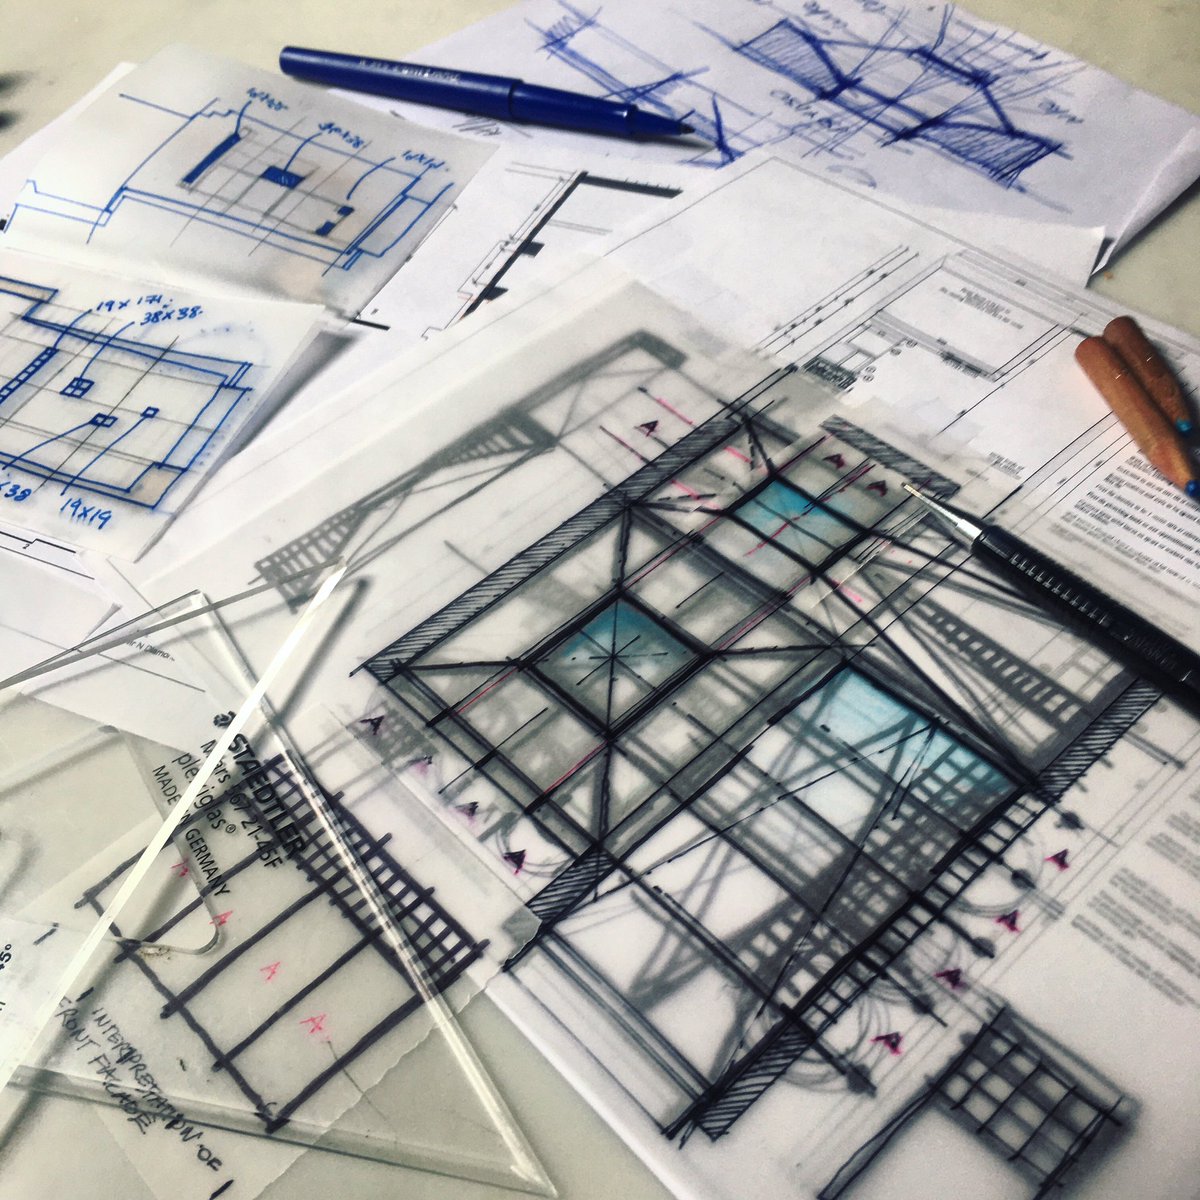 Back to the drawing board for last design details of extension project in London Barnes, UK
#architecture #architettura #architect #barneslondon #arqsketch #schizzo #sketch  #drawing #designdevelopment #architecturesketch #transformation #refurbishment #matteocainerarchitecture